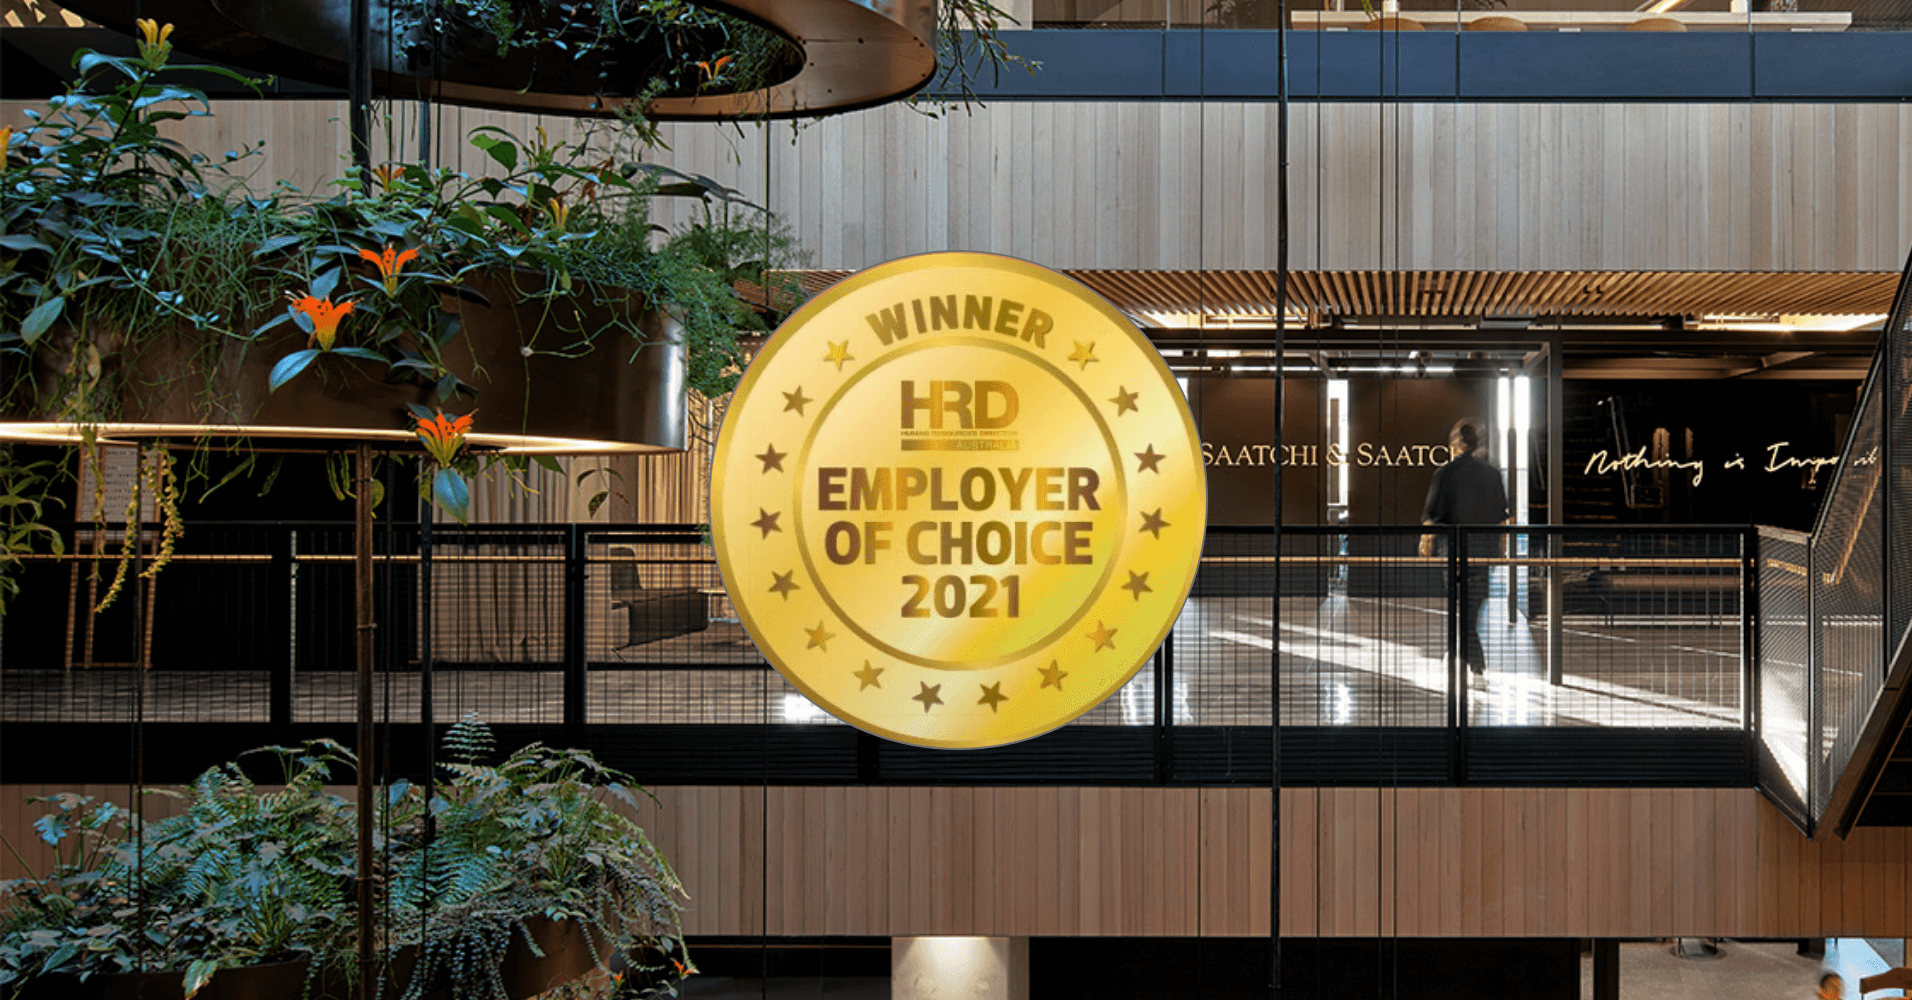 Publicis Groupe Employer of Choice by HRD